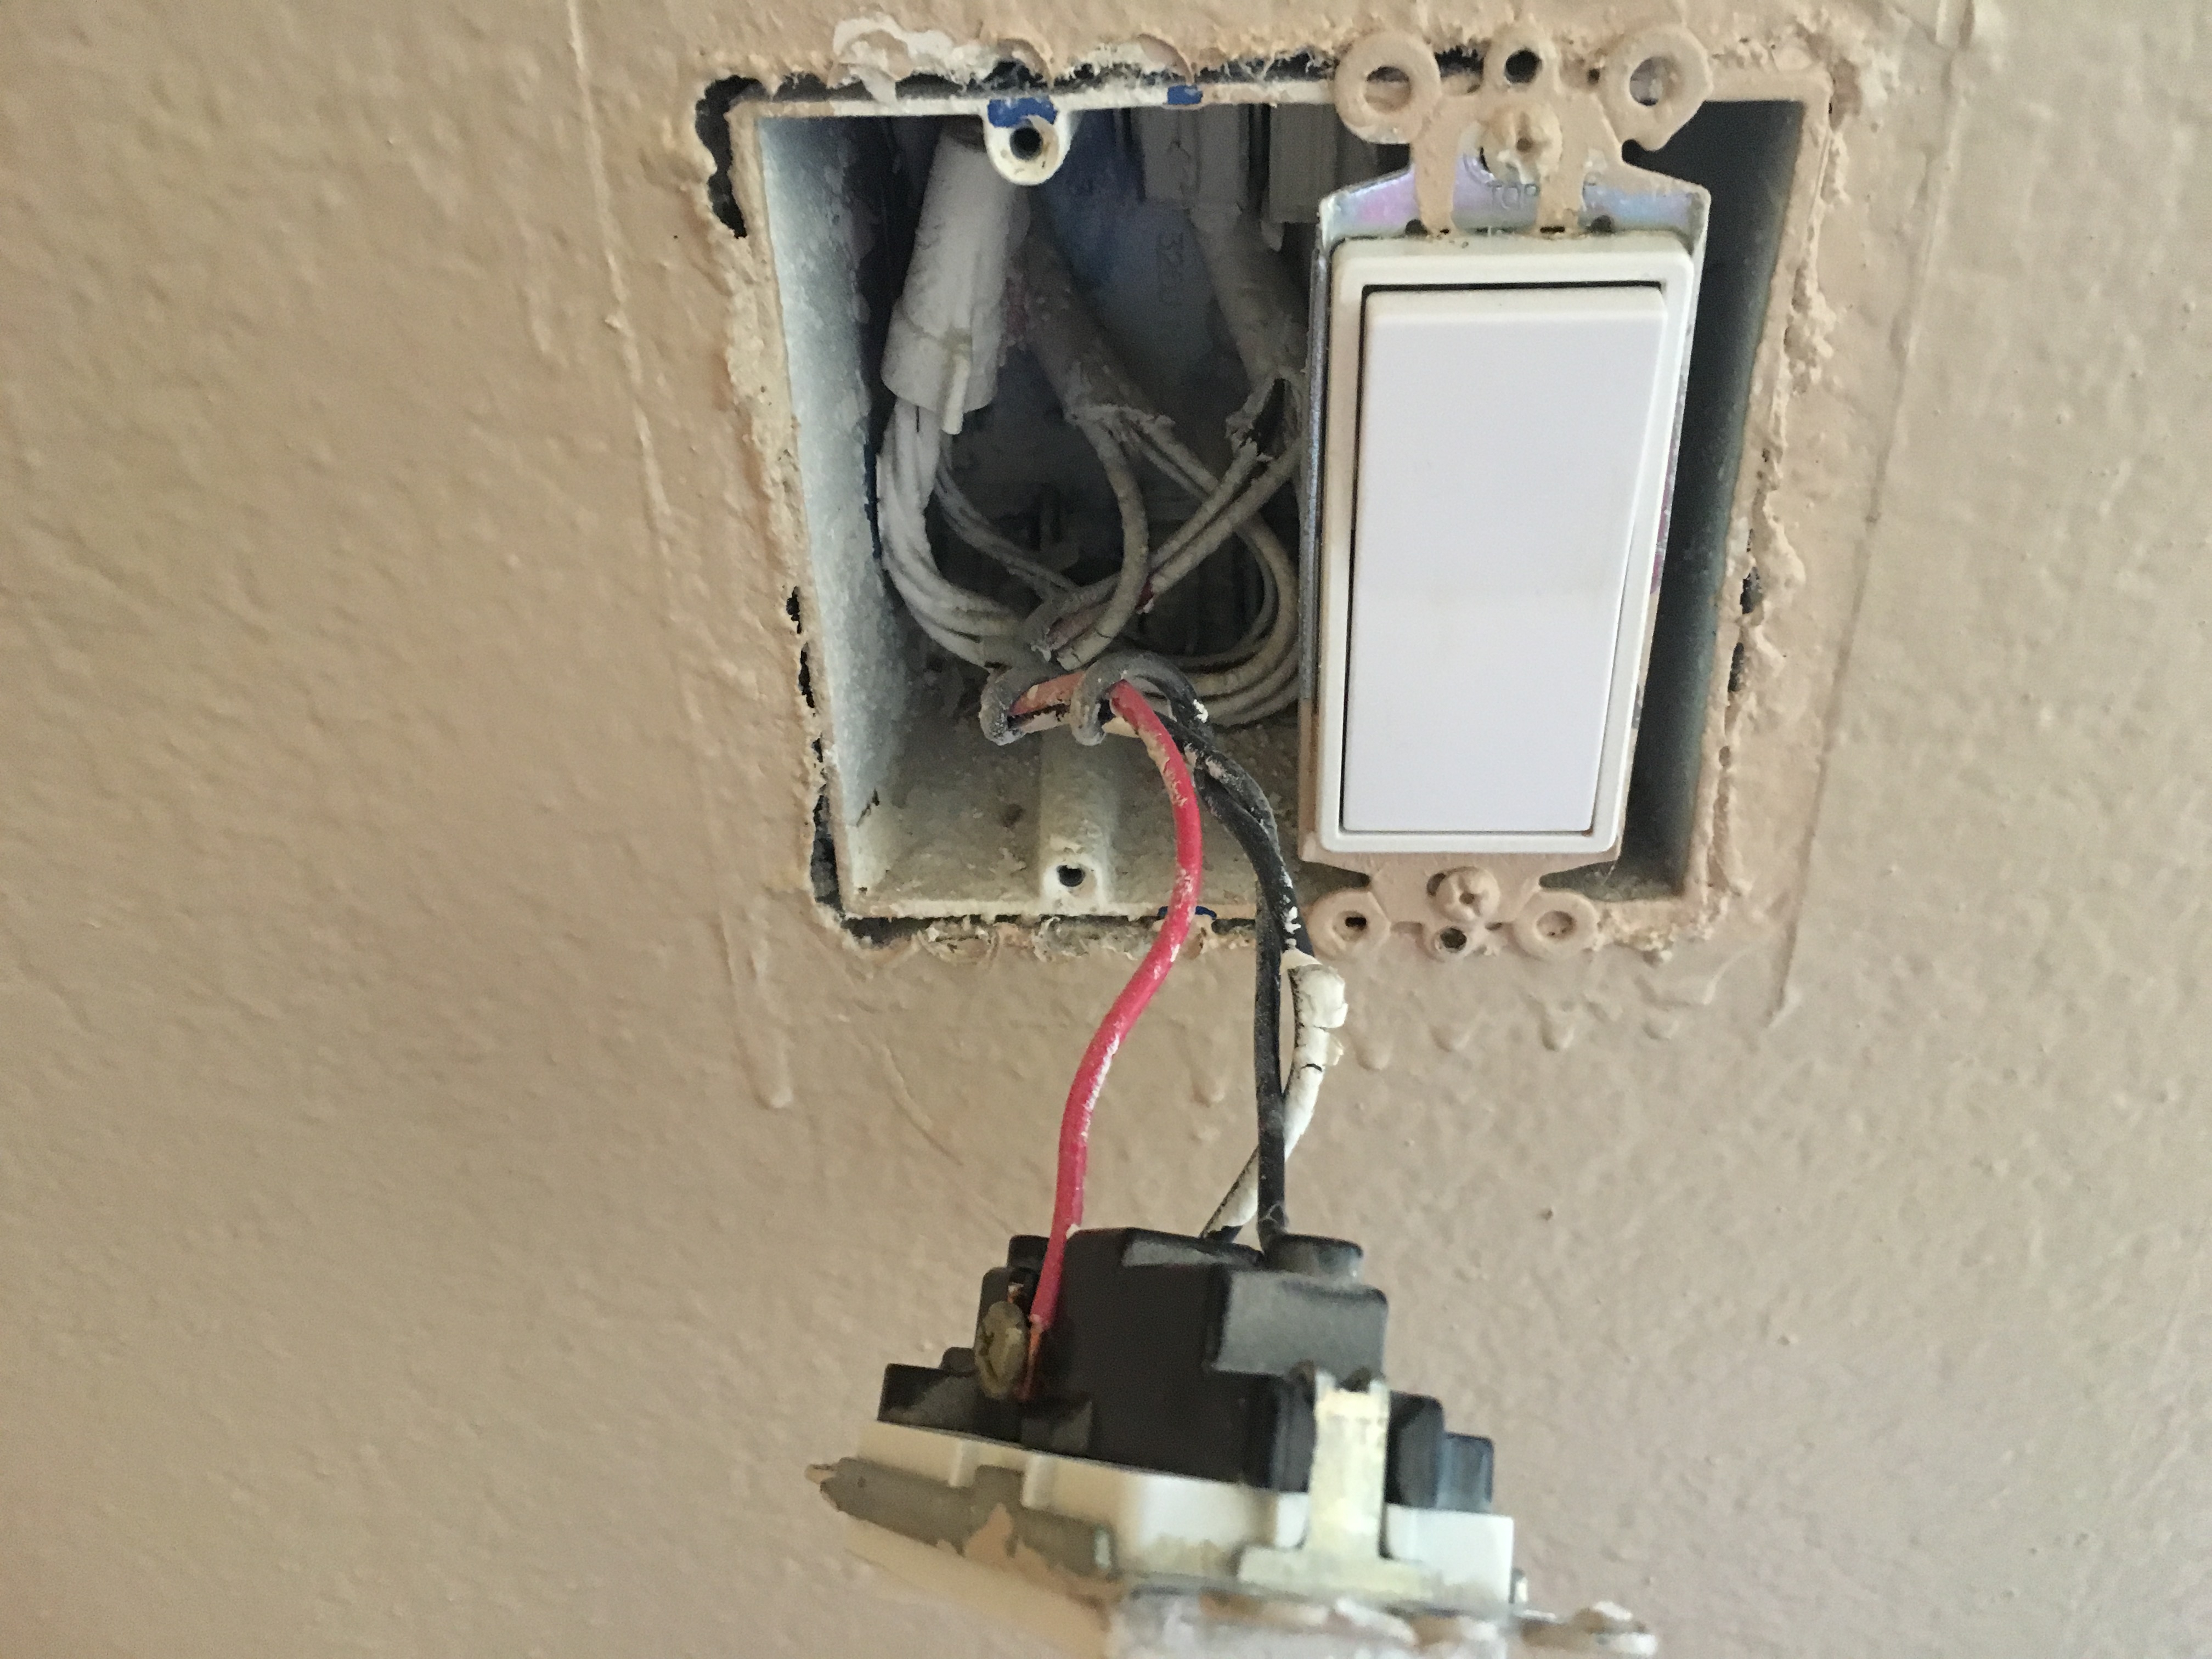 Permalink to Separate Switch For Ceiling Fan And Light